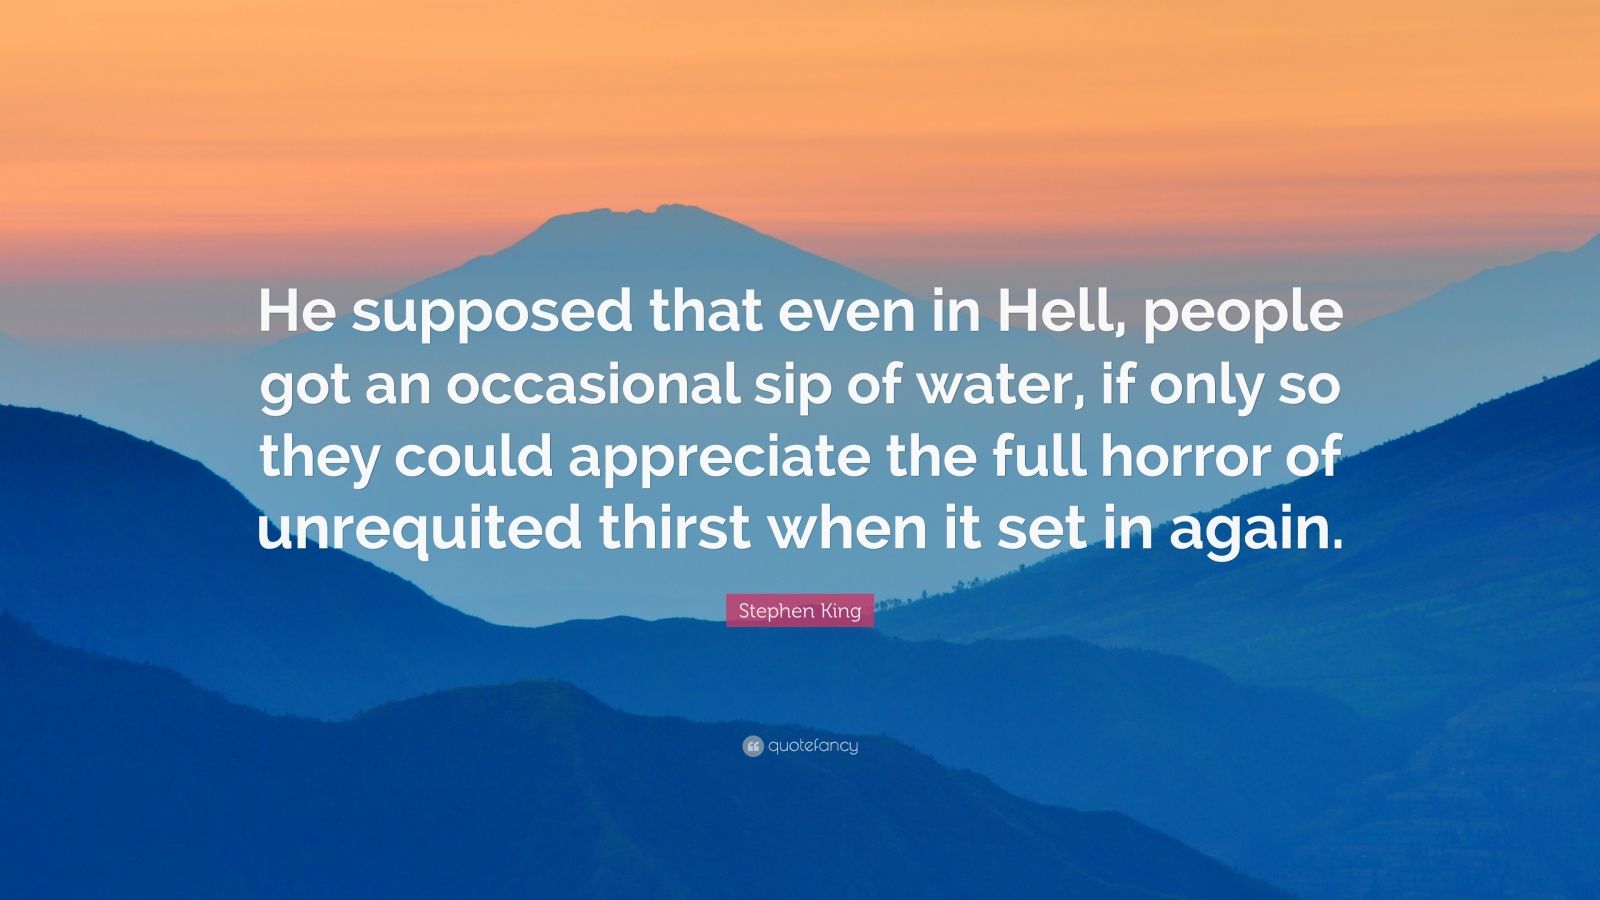 Stephen King Quote: “He supposed that even in Hell, people got an  occasional sip of water, if only so they could appreciate the full horror  o”